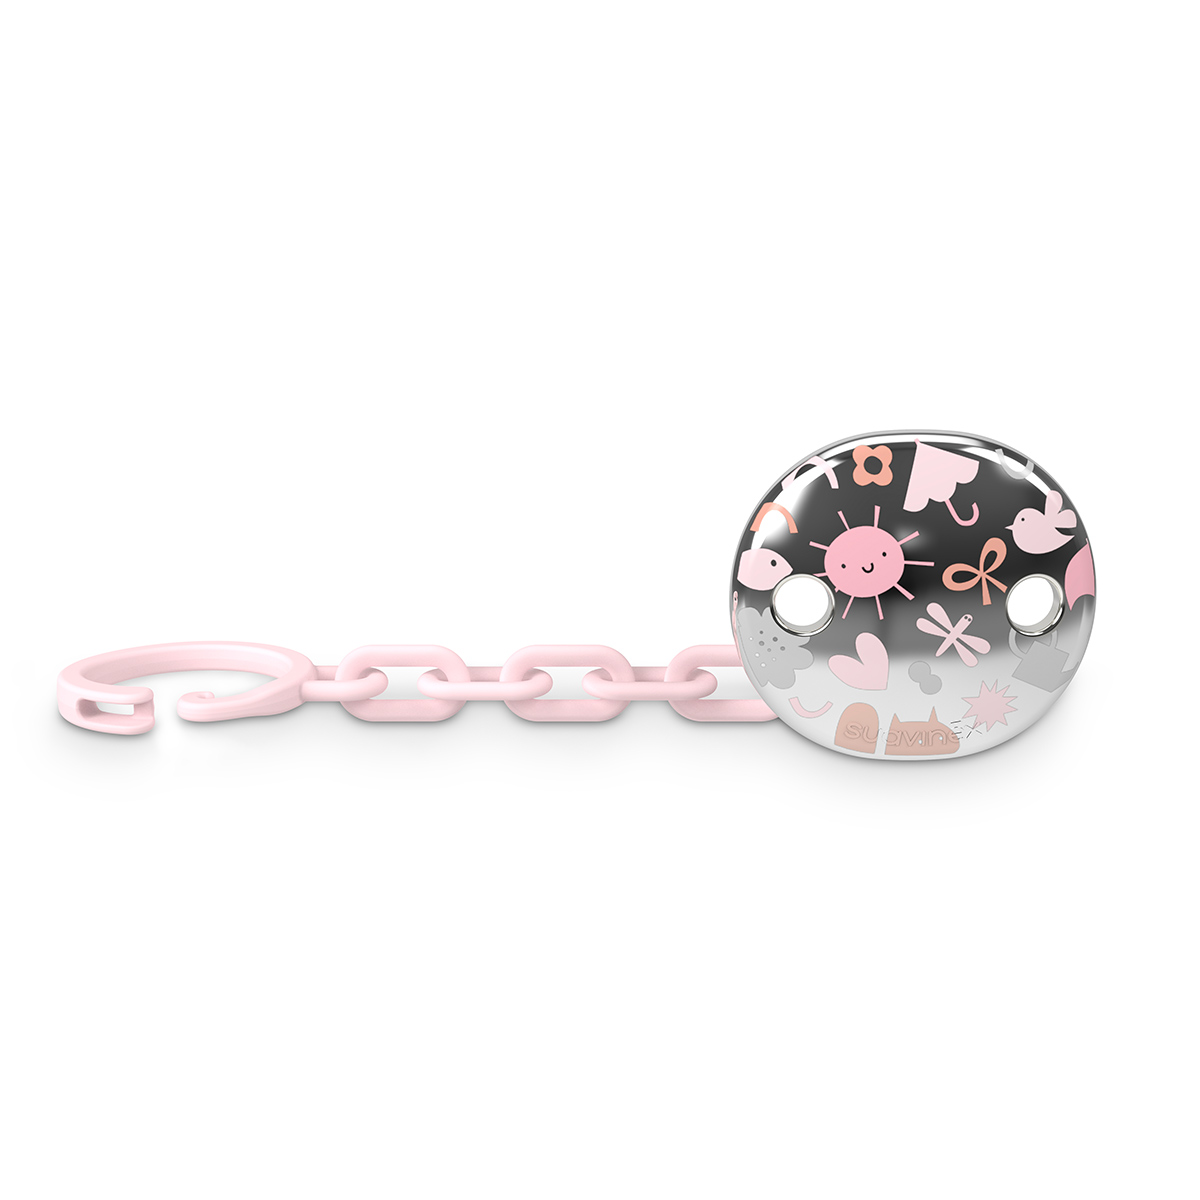 Jewel soother clip